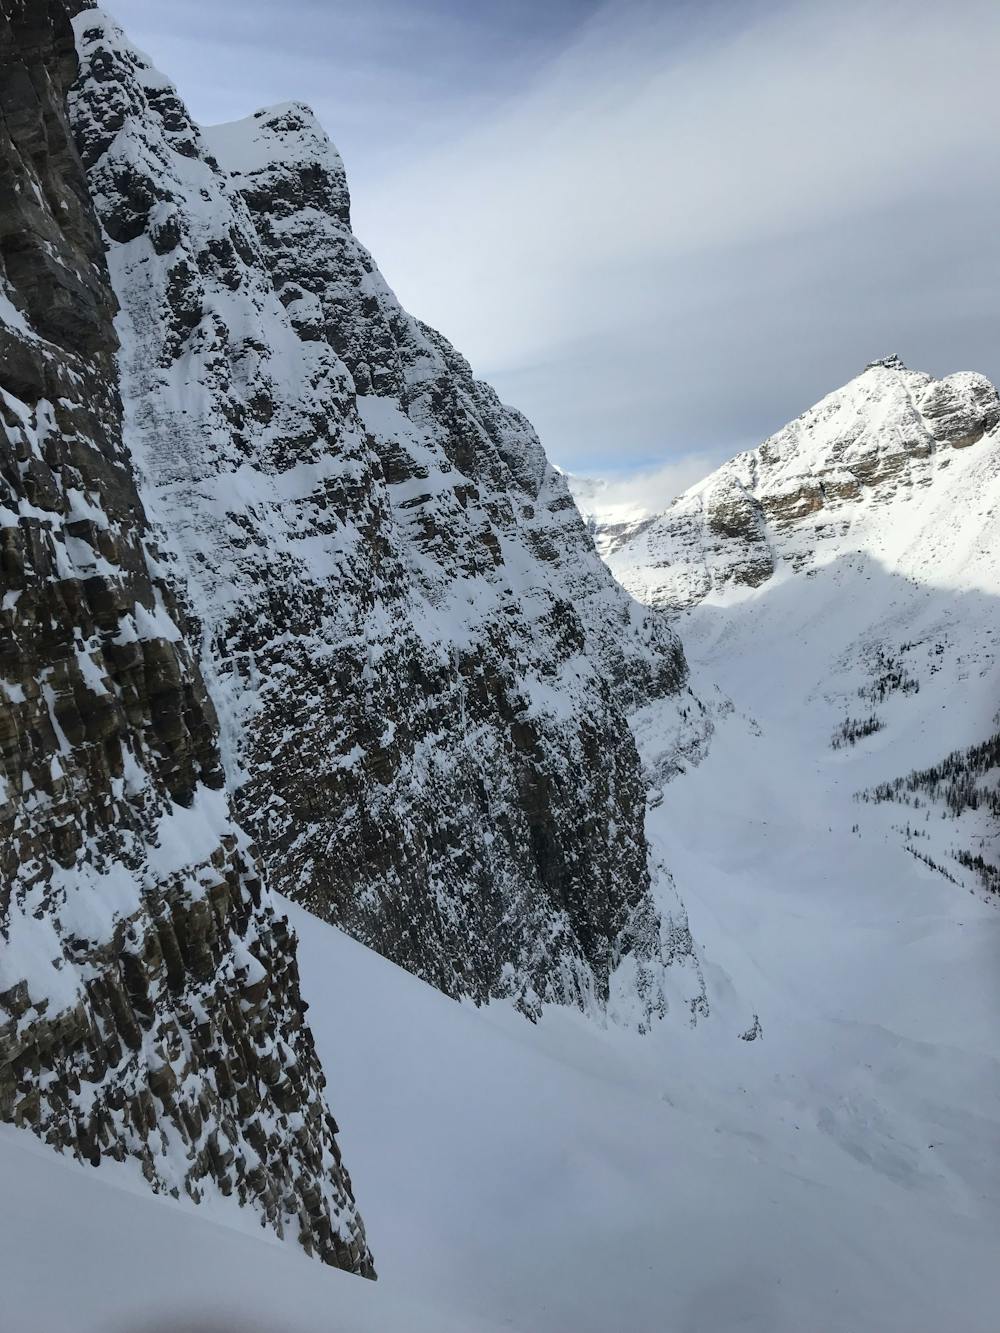 Views of the dramatic couloir walls